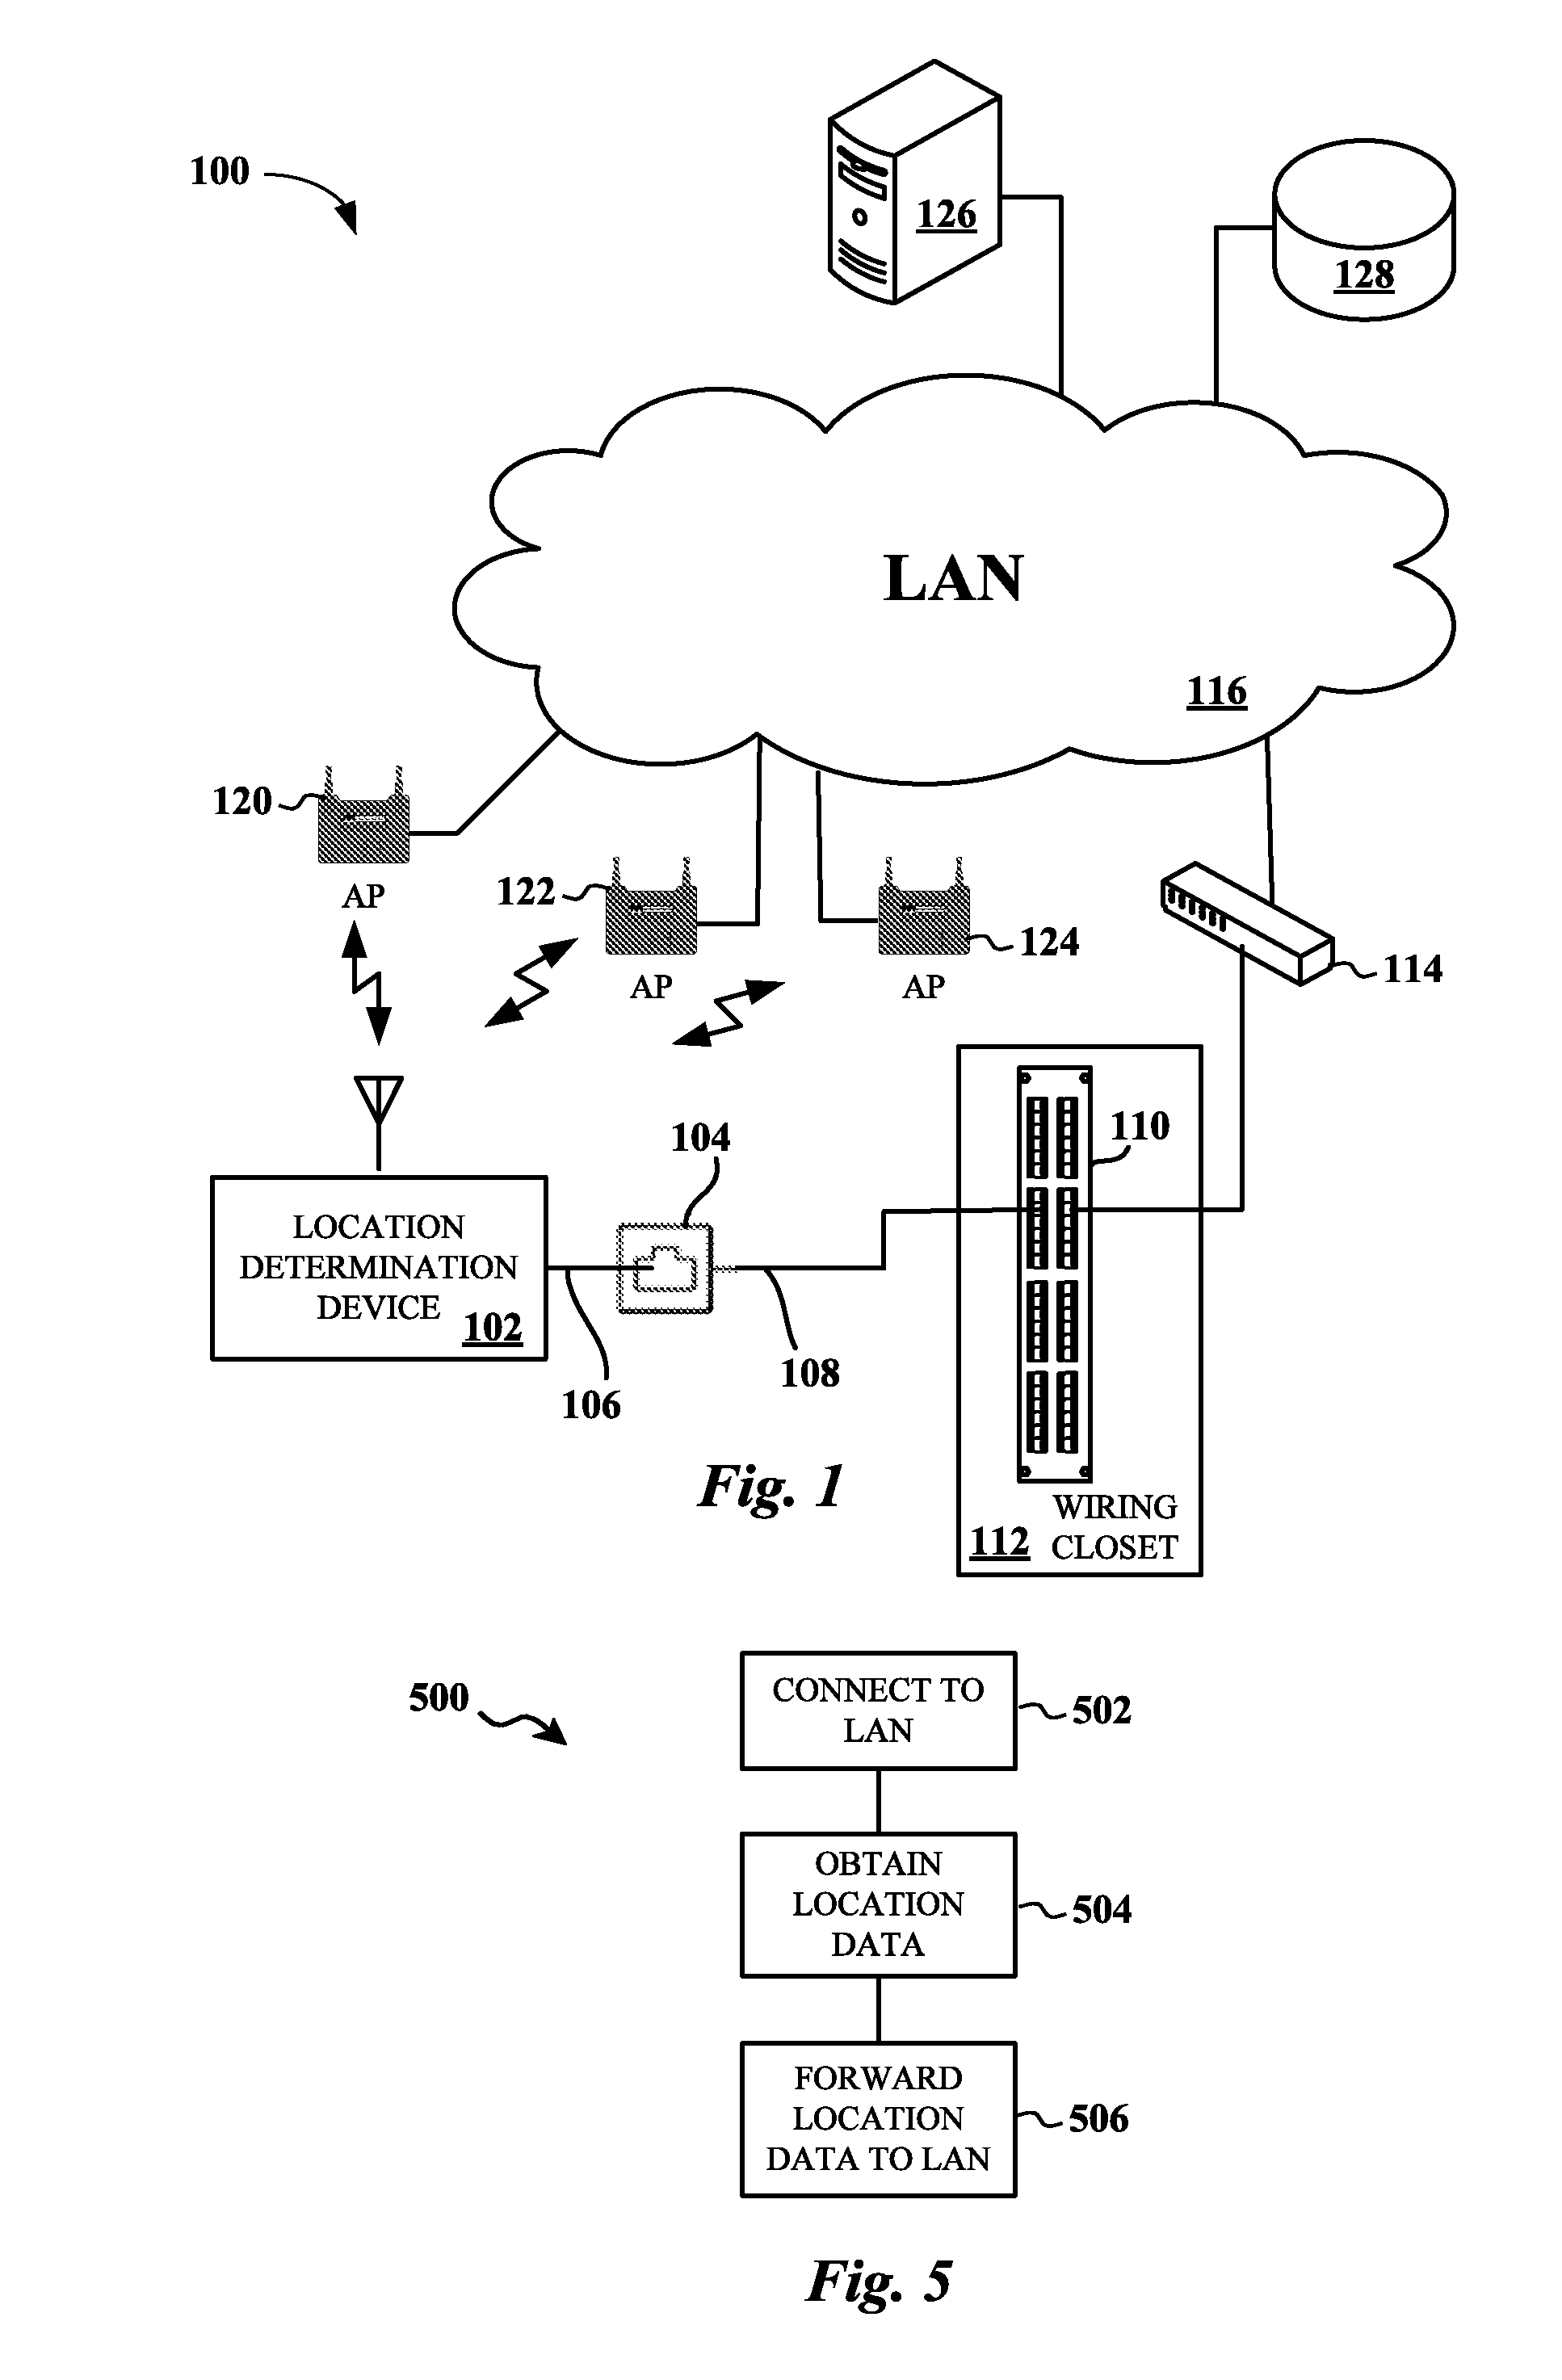 Obtaining per-port location information for wired LAN switches